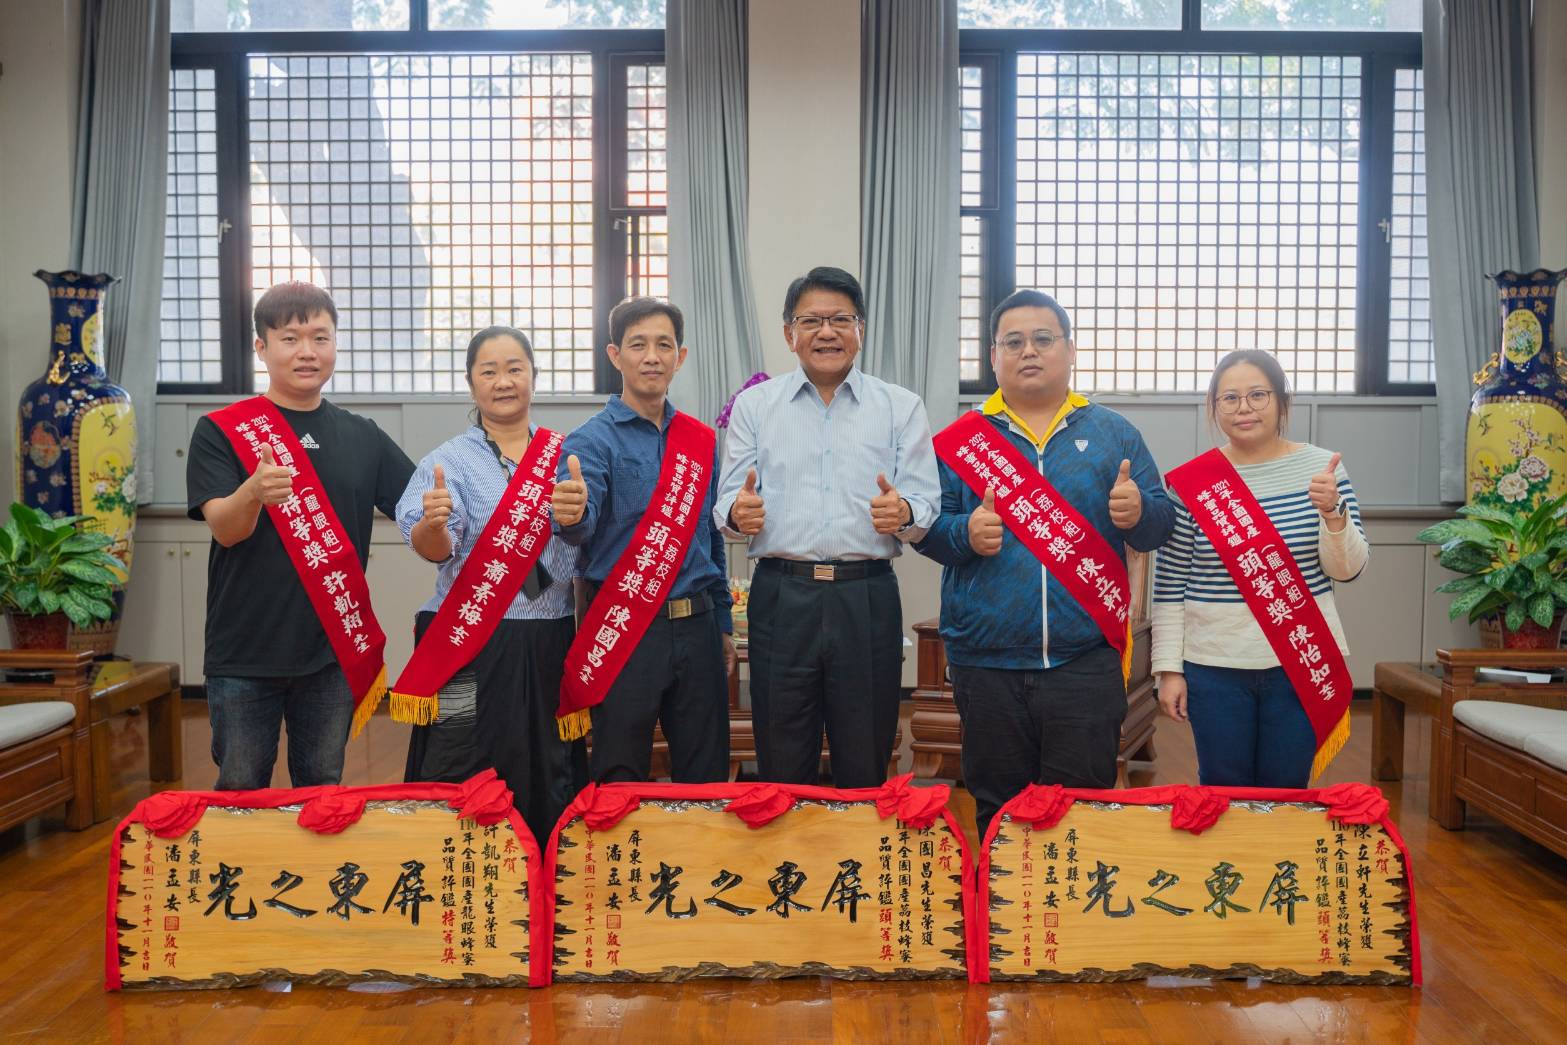 The Mayor of Pingtung County - Pan Men-an (third from right) took a photo with beekeepers. (Photo / Provided by the Pingtung County Government)